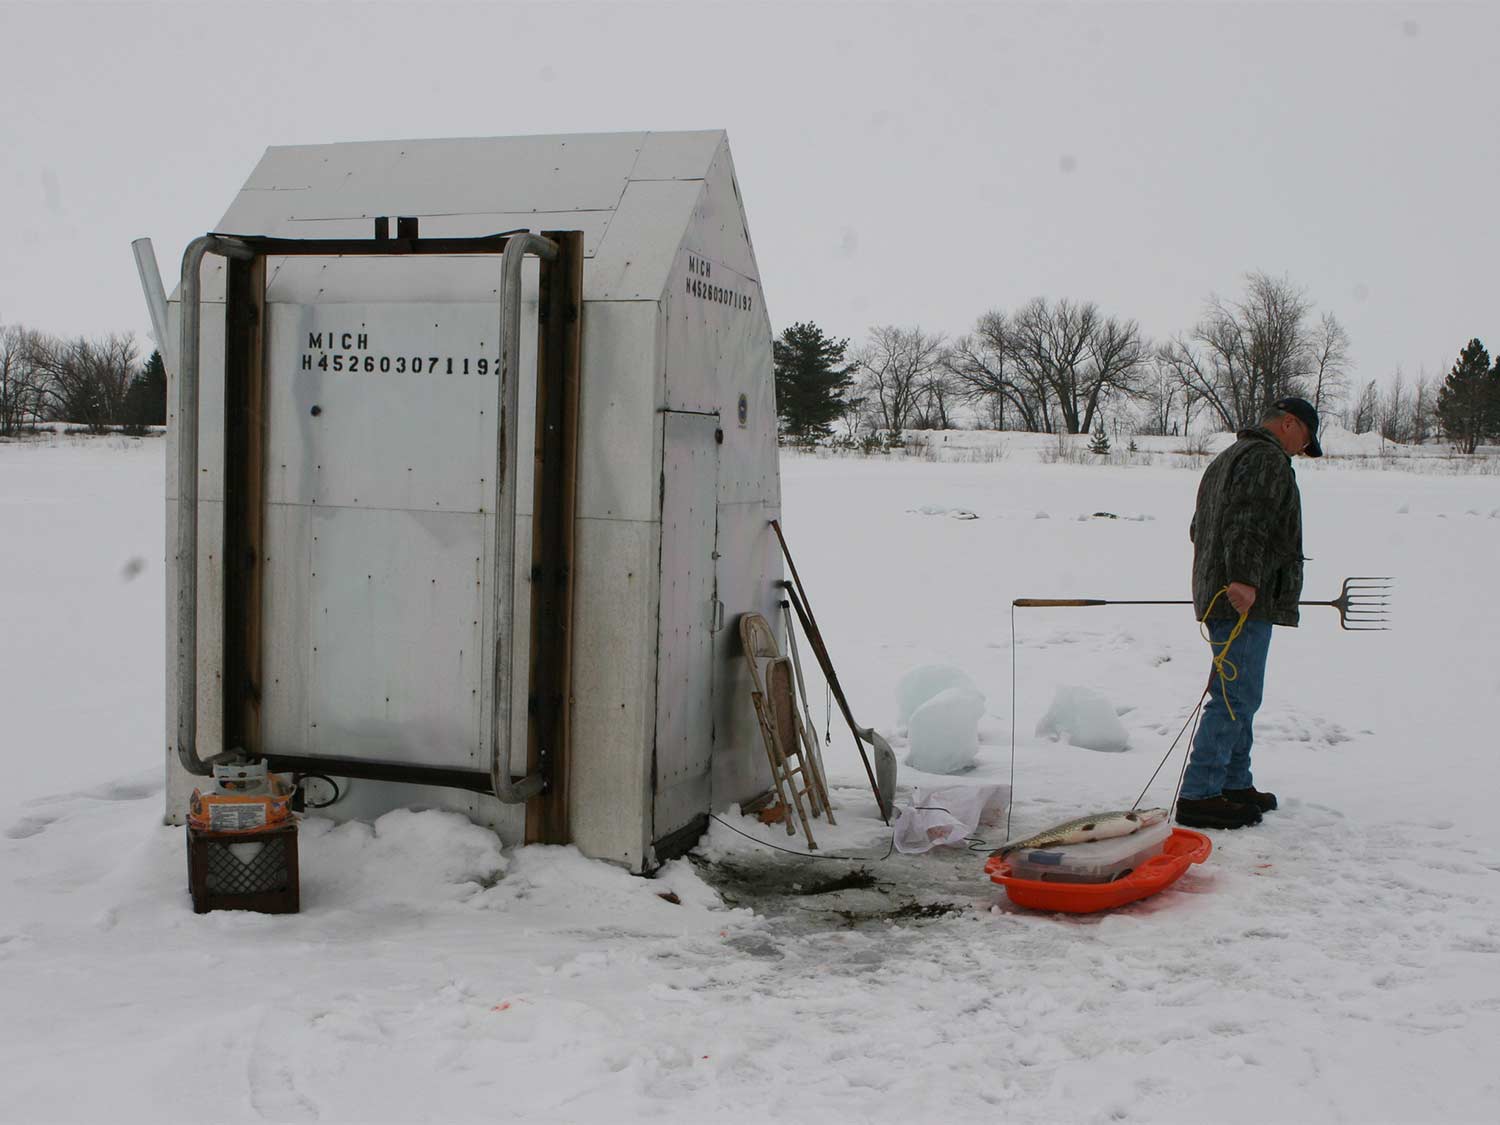 A man stands in the snow next to a shed.